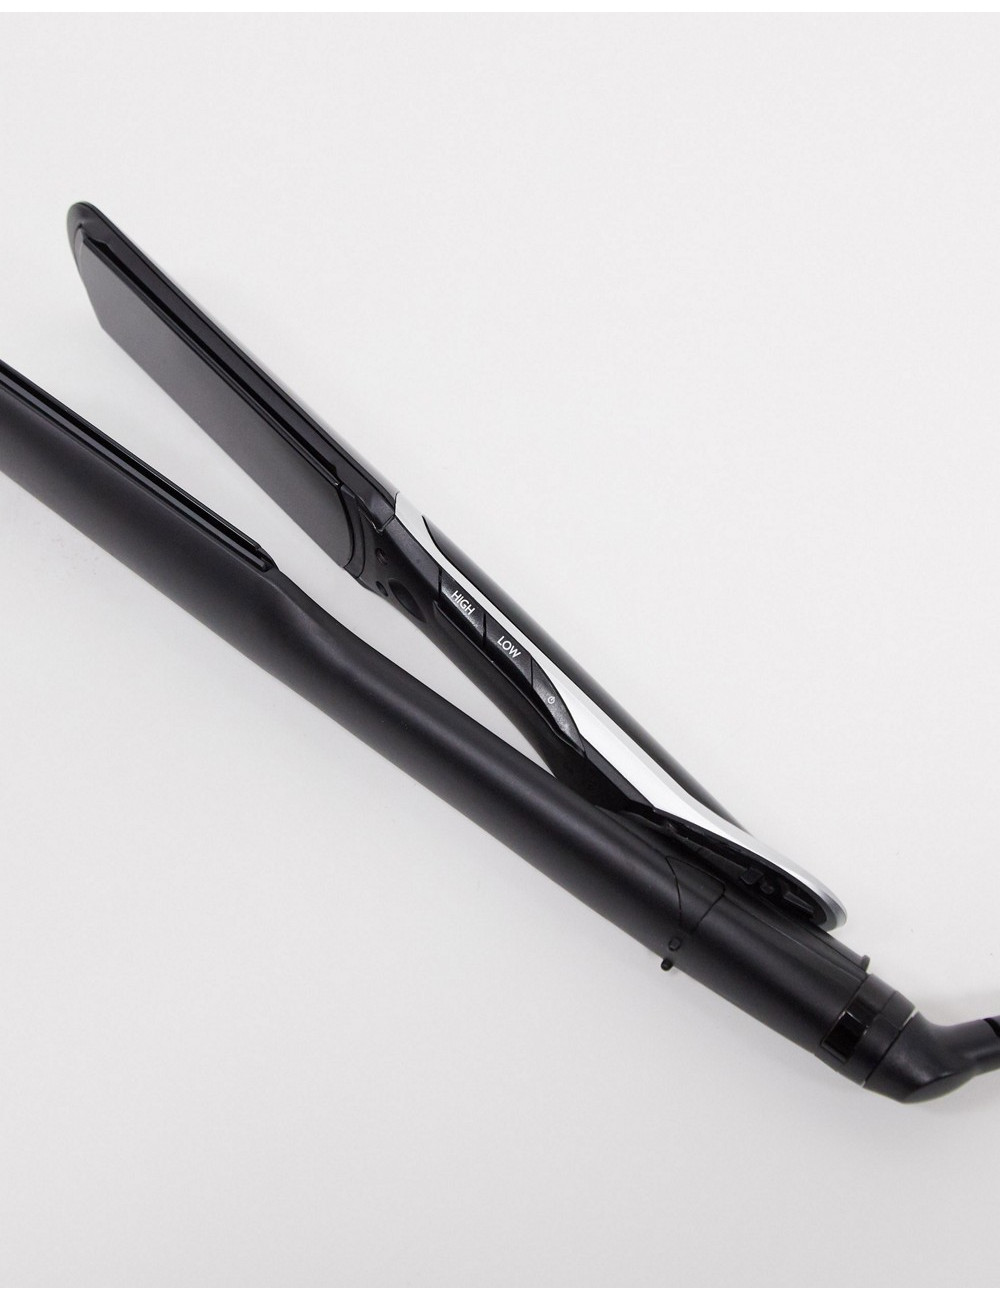 BaByliss Smooth Pro Wide...